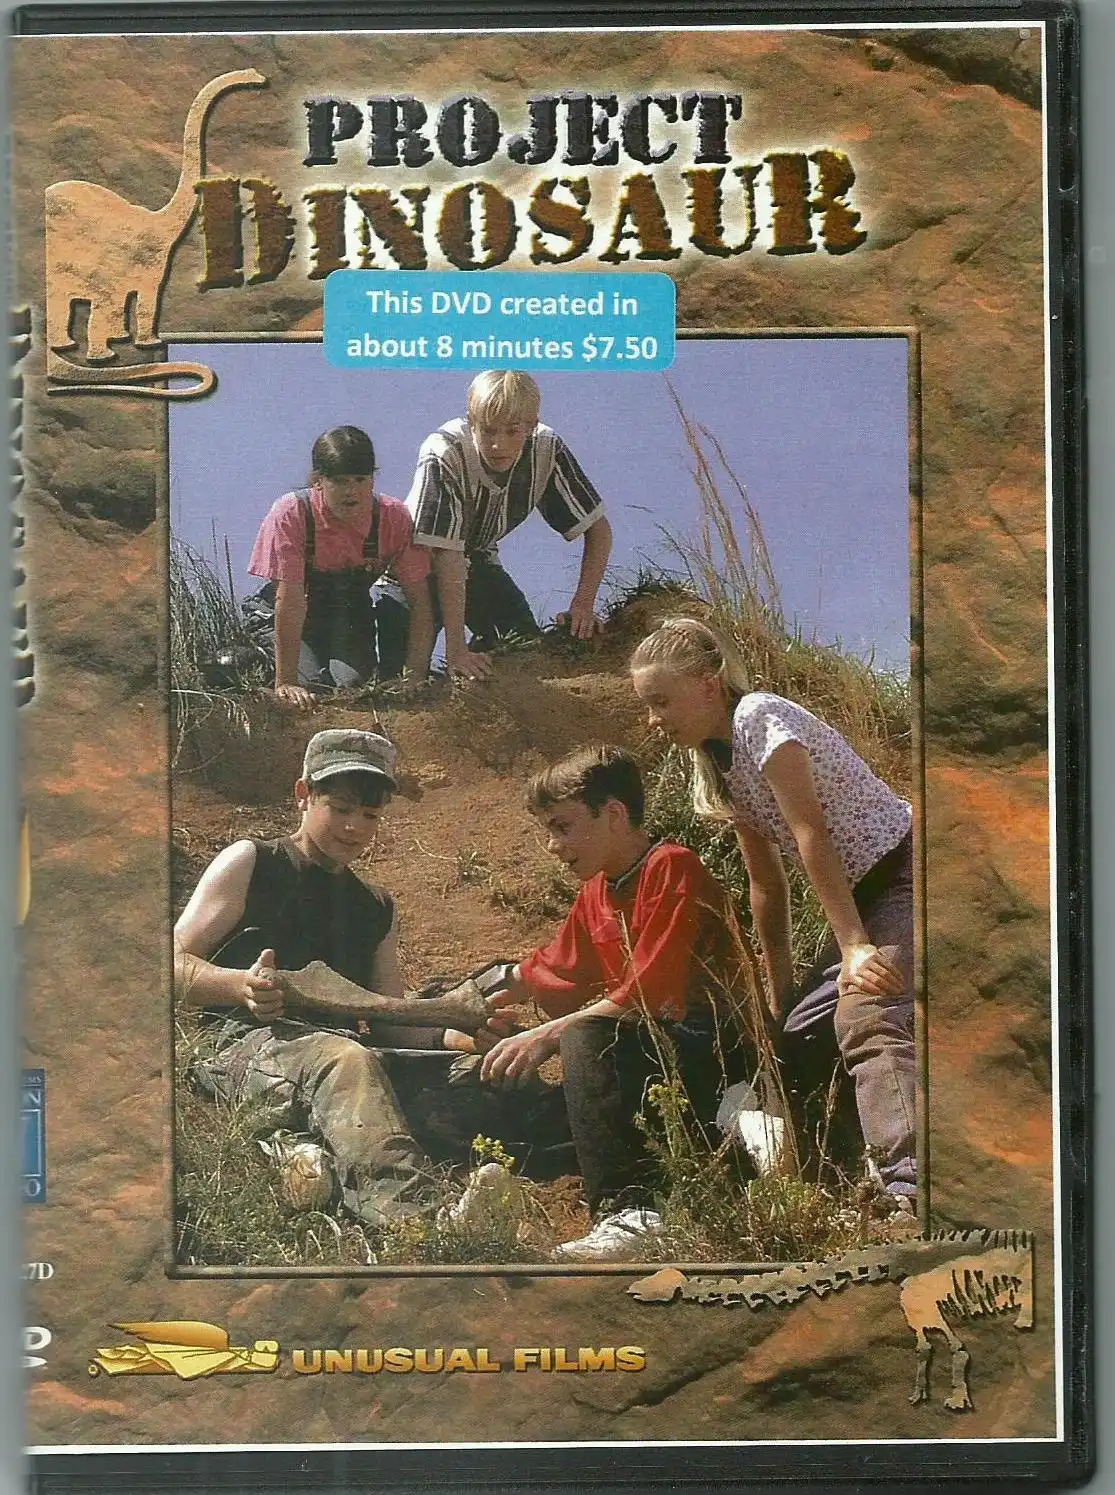 Watch and Download Project Dinosaur 2